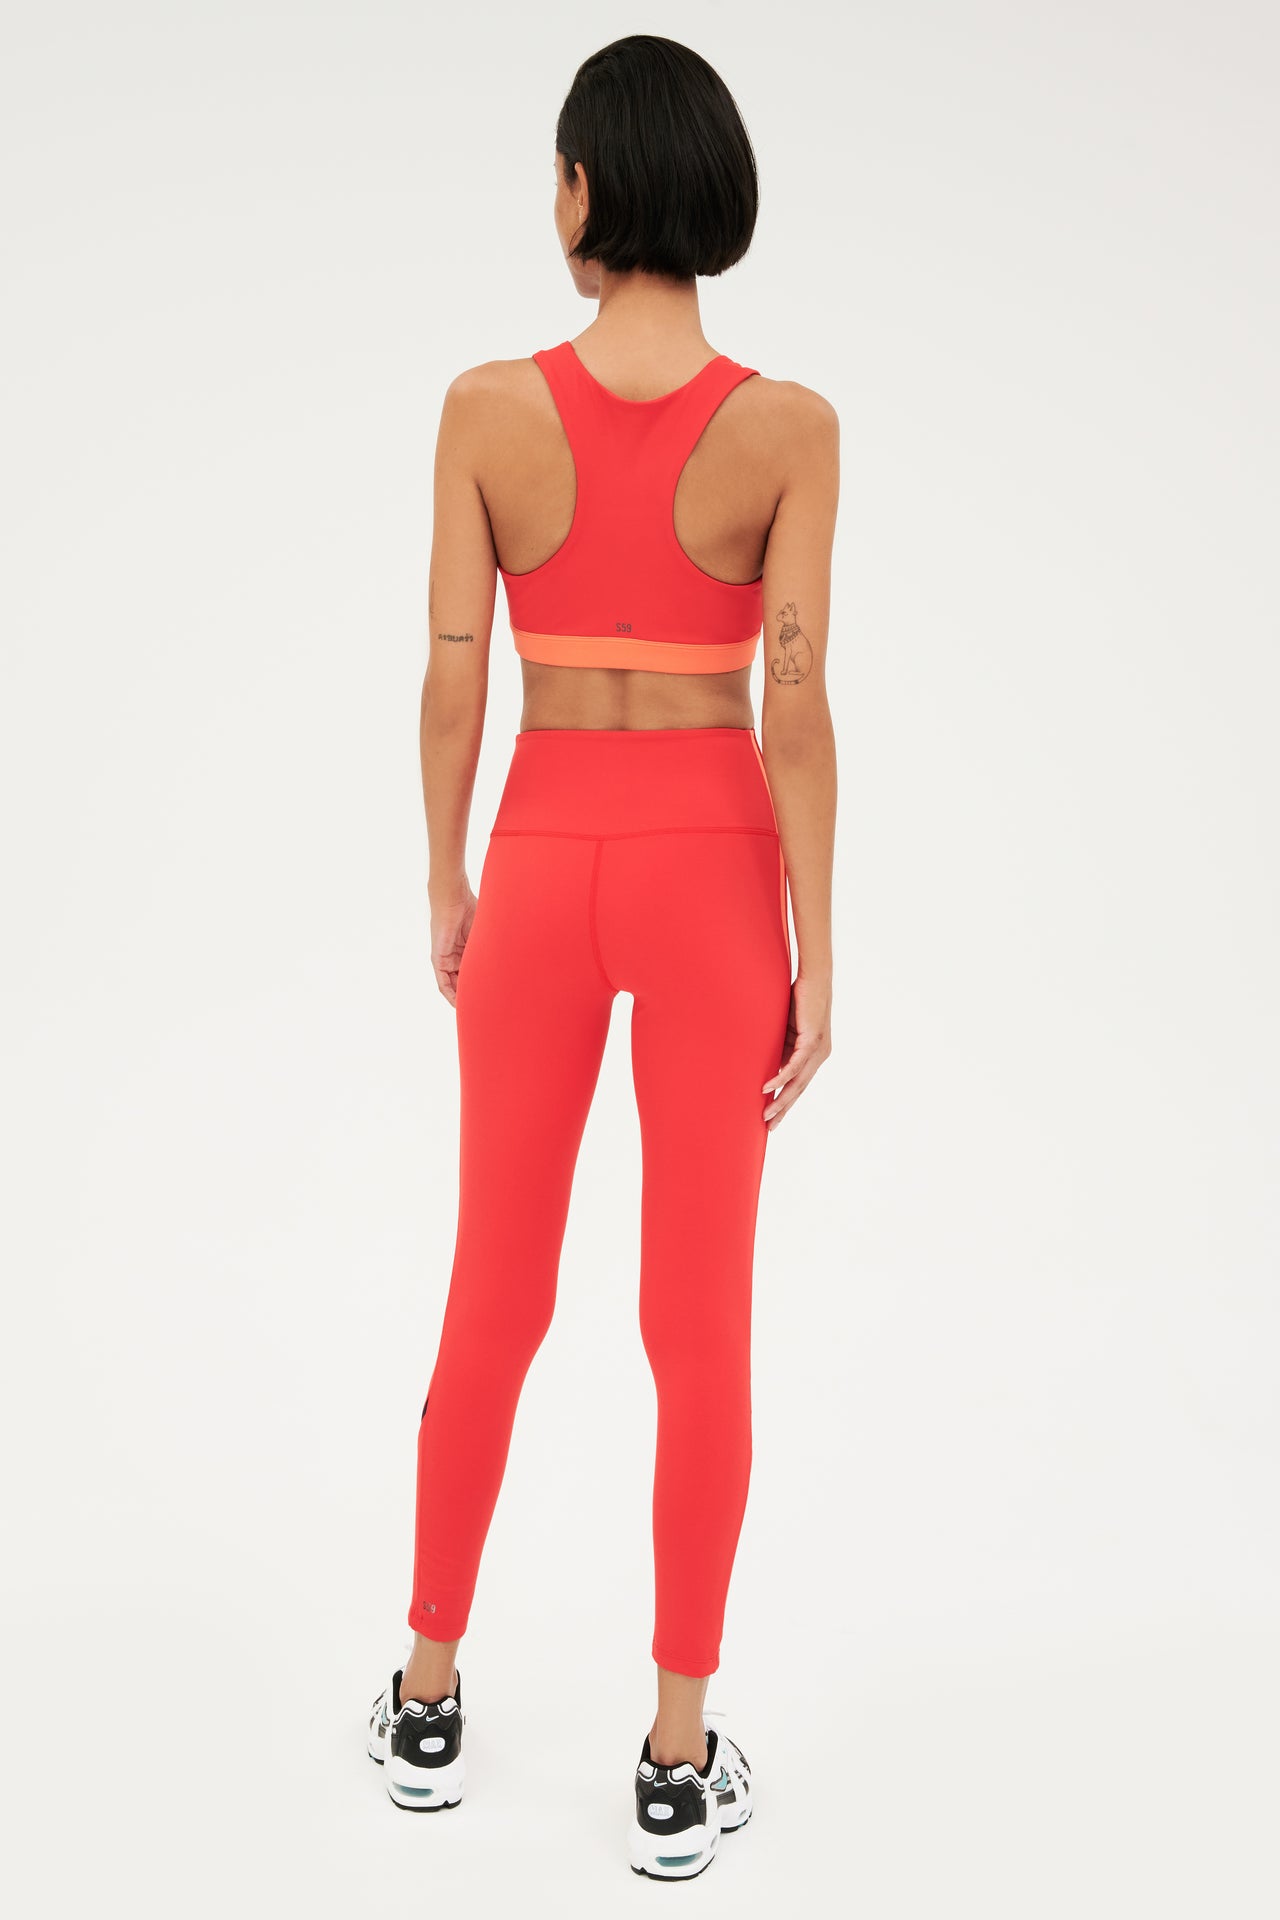 Full back view of girl wearing red with a orange band around the ribs and red leggings with black and white shoes